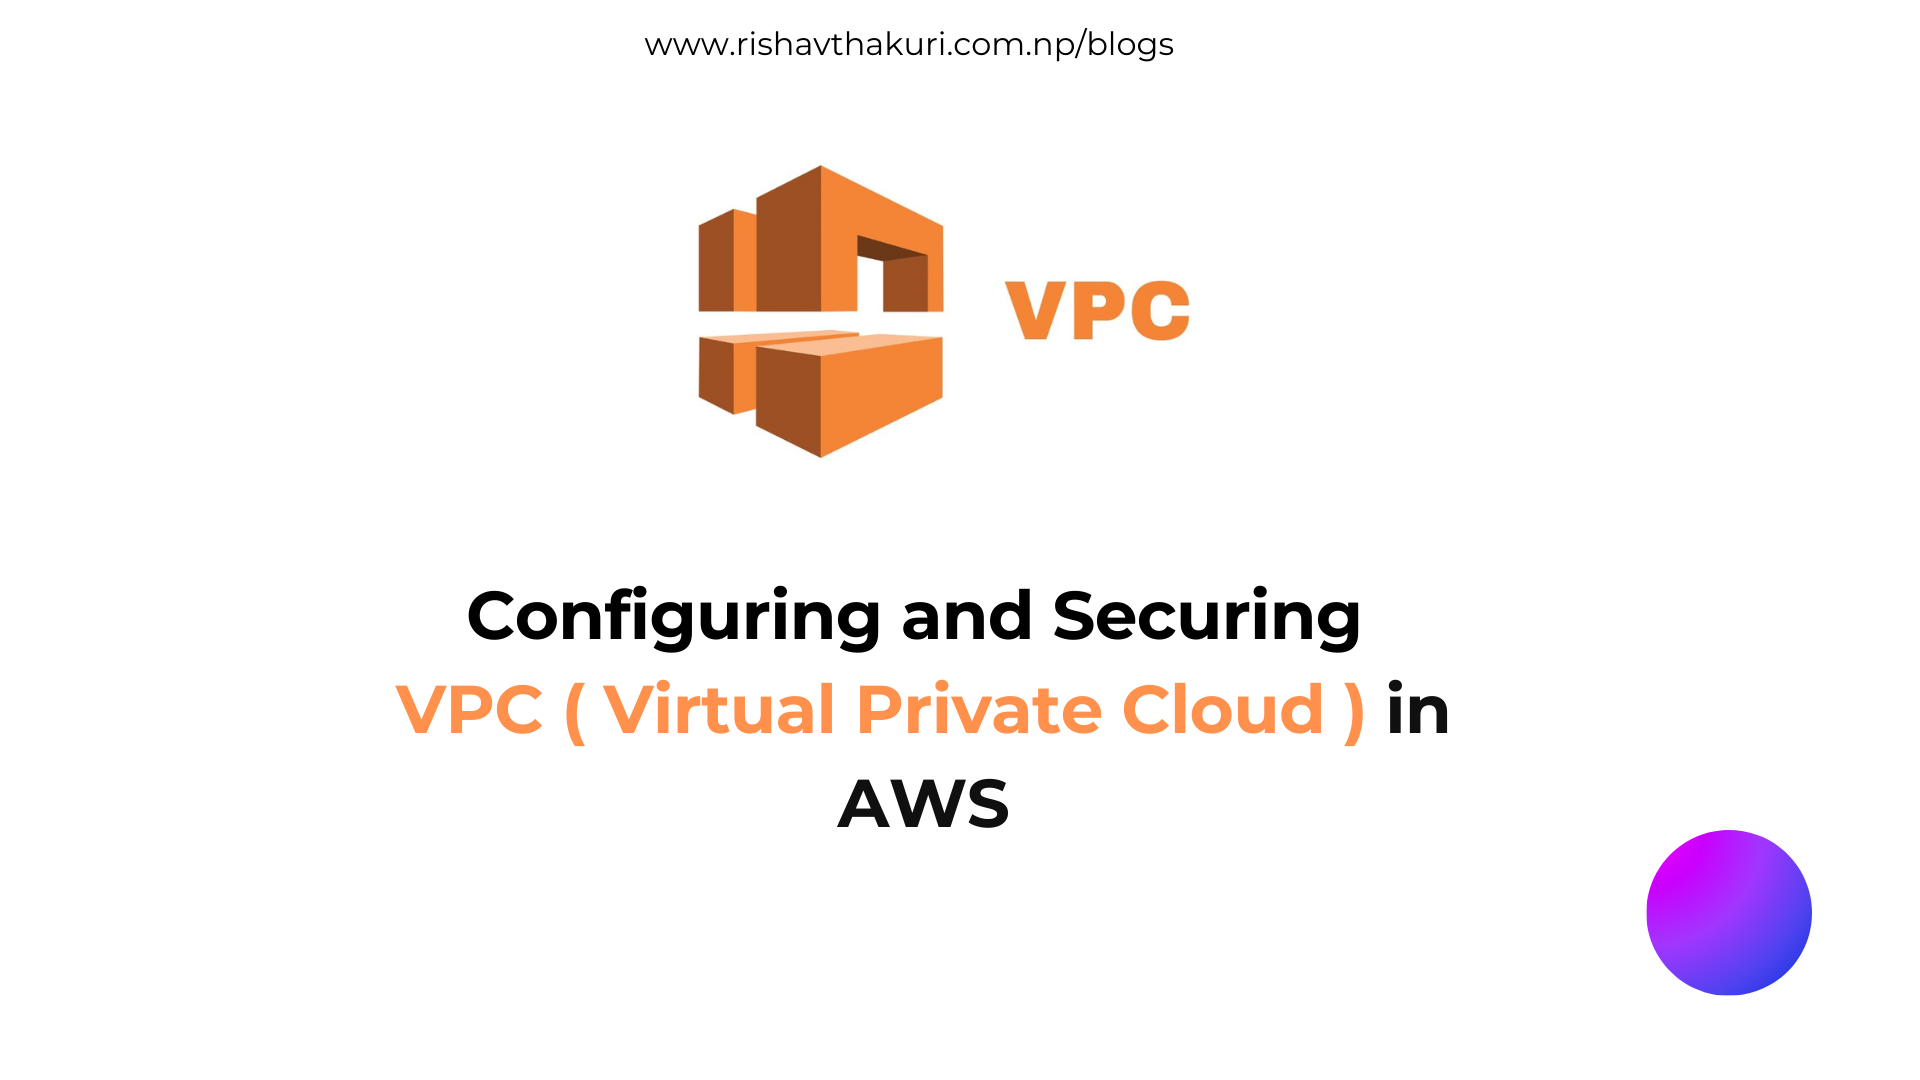 Configuring and Securing VPC – Virtual Private Cloud in AWS